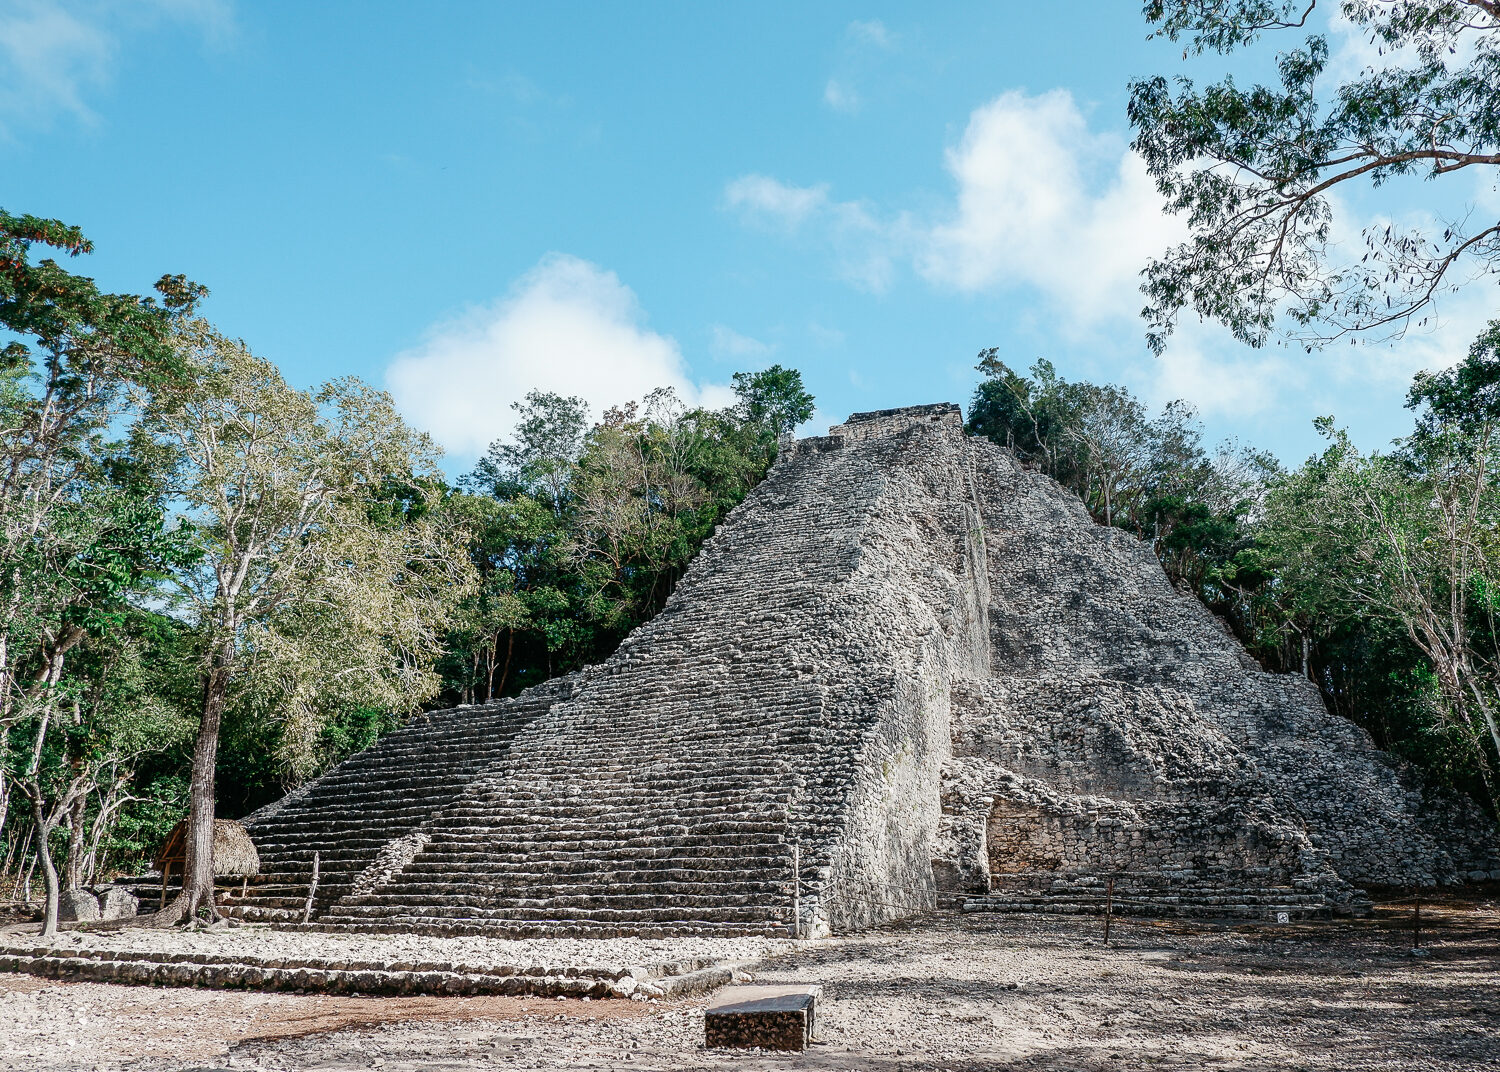 The ruins of Coba is the wildest one of the 8 archaeological sites in Mexico you have to visit